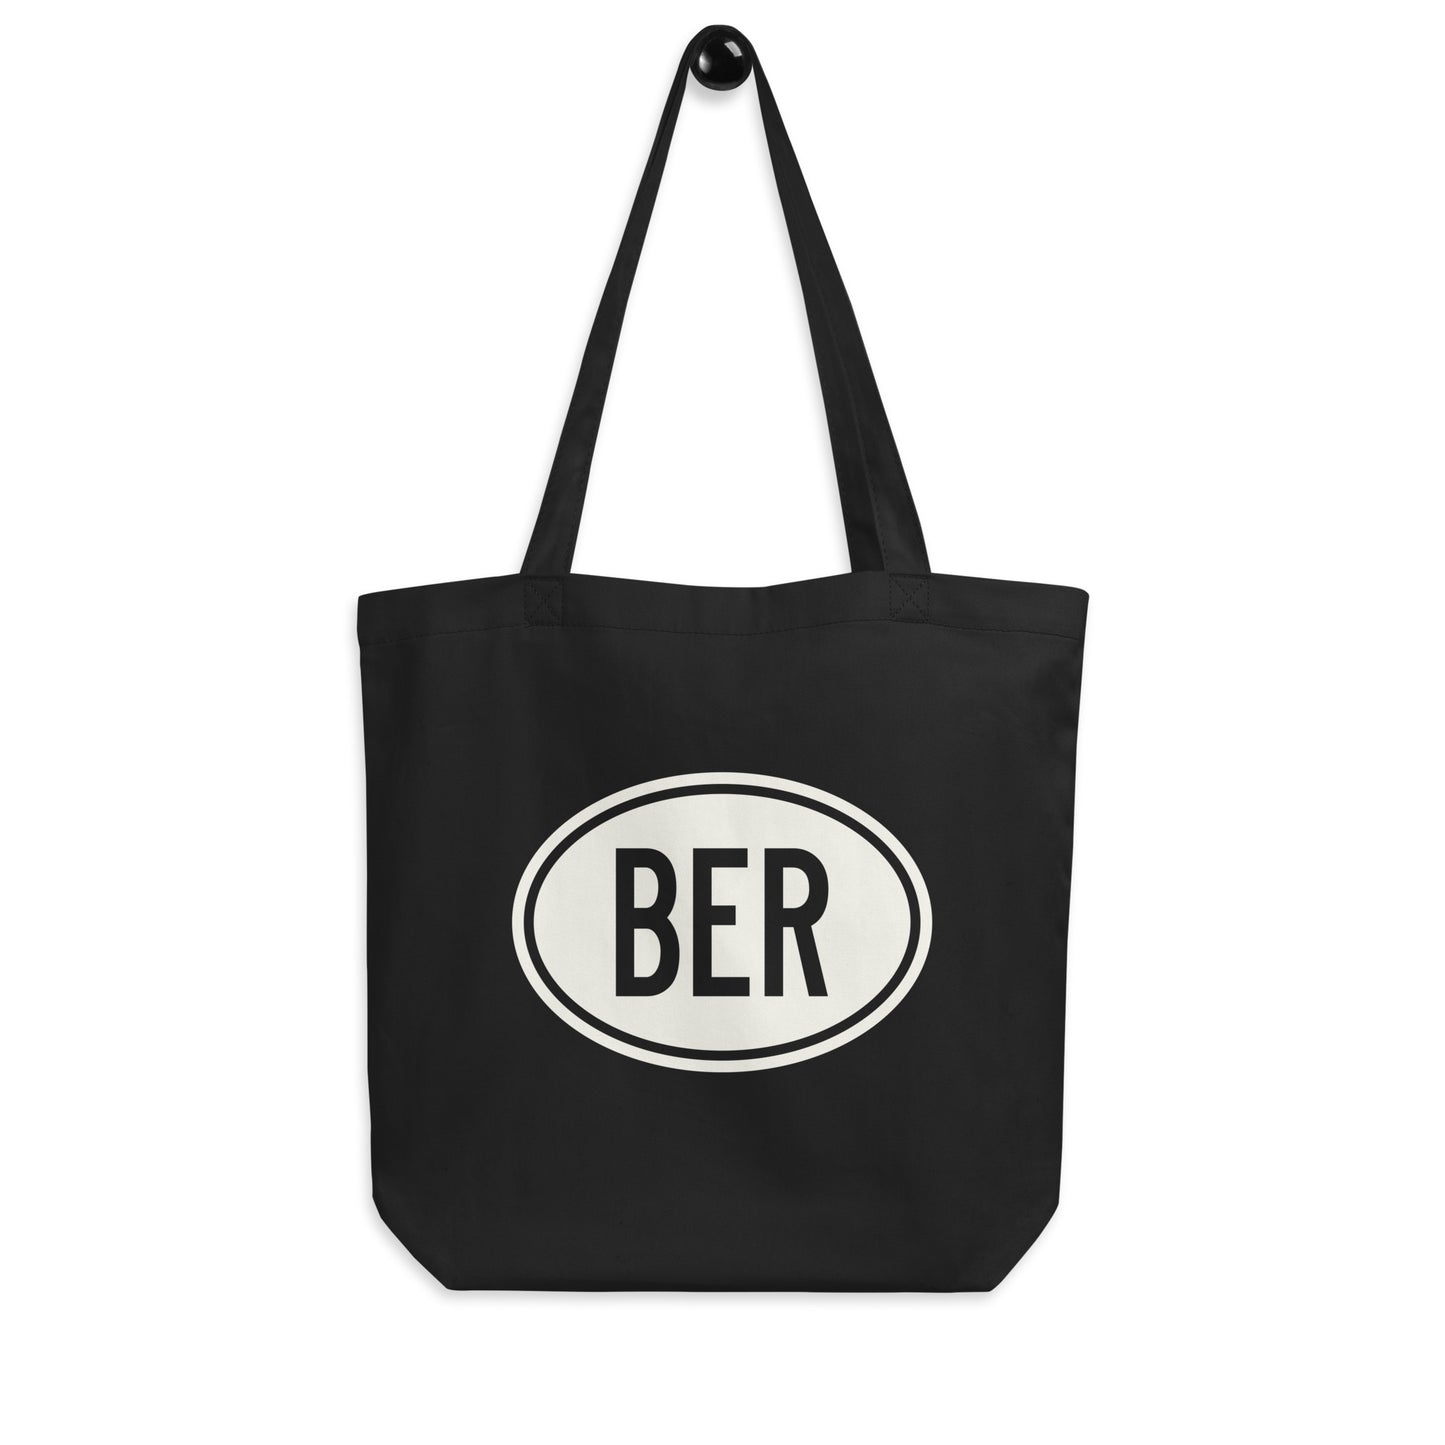 Unique Travel Gift Organic Tote - White Oval • BER Berlin • YHM Designs - Image 04